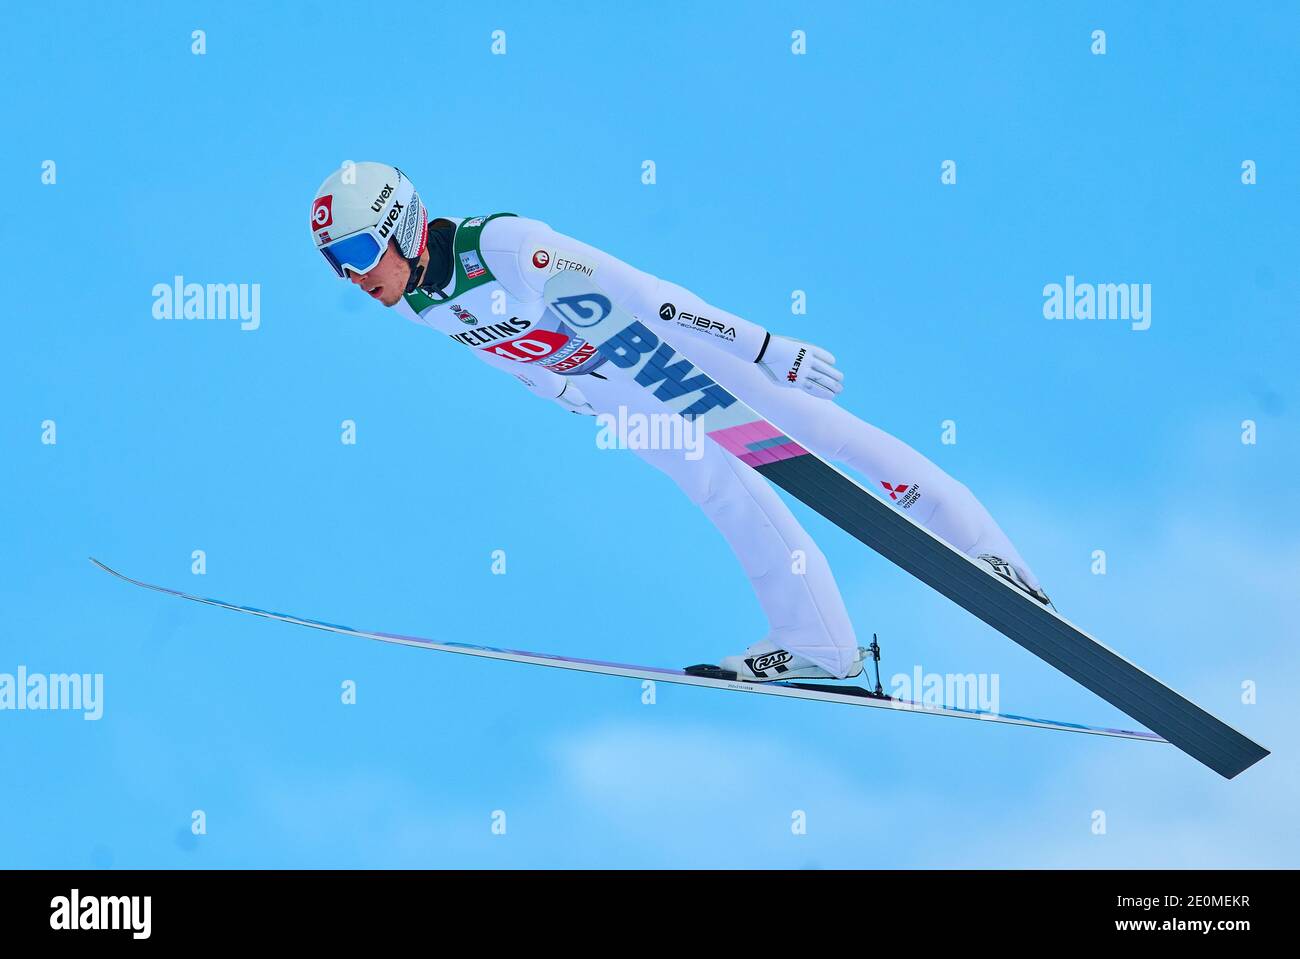 Johann Andre FORFANG, NOR in action at the Four Hills Tournament Ski Jumping at Olympic Stadium, Grosse Olympiaschanze in Garmisch-Partenkirchen, Bavaria, Germany, January 01, 2021.  © Peter Schatz / Alamy Live News Stock Photo